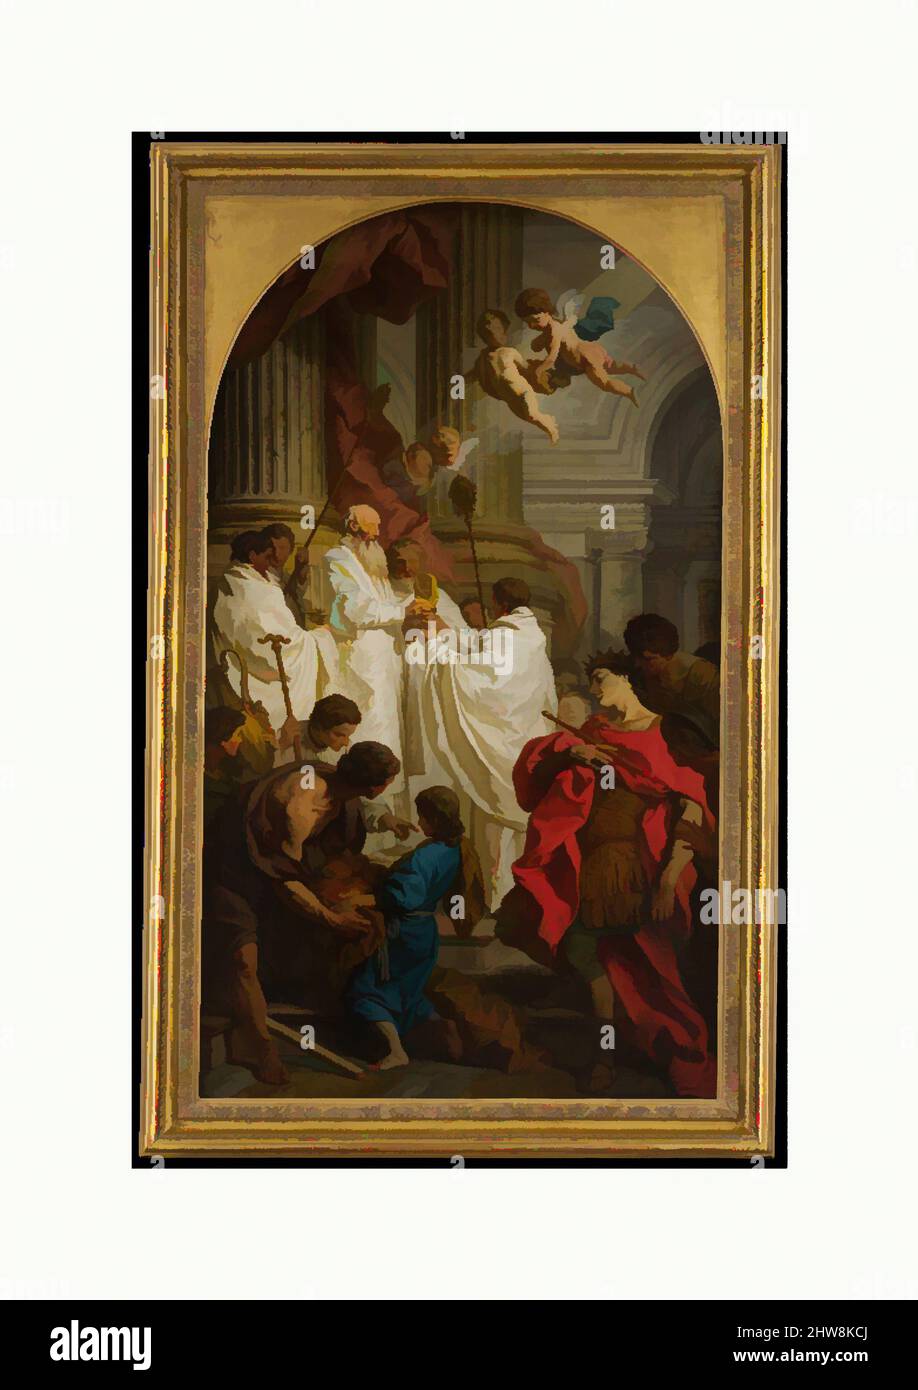 Art inspired by The Mass of Saint Basil, 1746, Oil on canvas, transferred from canvas, 54 x 31 1/8 in. (137 x 79 cm), Paintings, Pierre Hubert Subleyras (French, Saint-Gilles-du-Gard 1699–1749 Rome), The rare subject concerns Saint Basil the Great (ca. 339–379) and Emperor Valens, a, Classic works modernized by Artotop with a splash of modernity. Shapes, color and value, eye-catching visual impact on art. Emotions through freedom of artworks in a contemporary way. A timeless message pursuing a wildly creative new direction. Artists turning to the digital medium and creating the Artotop NFT Stock Photo